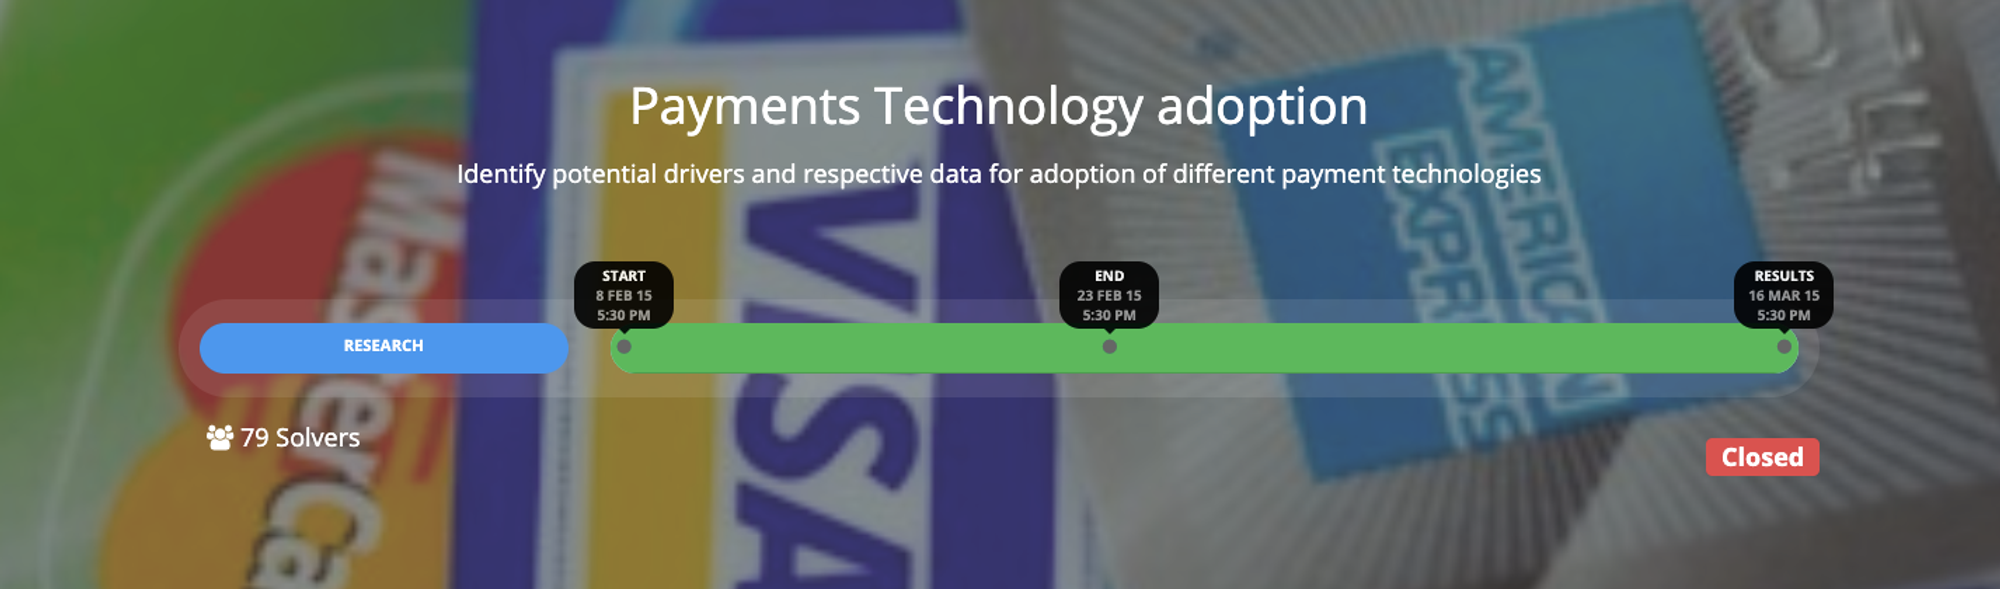 Payments Technology adoption